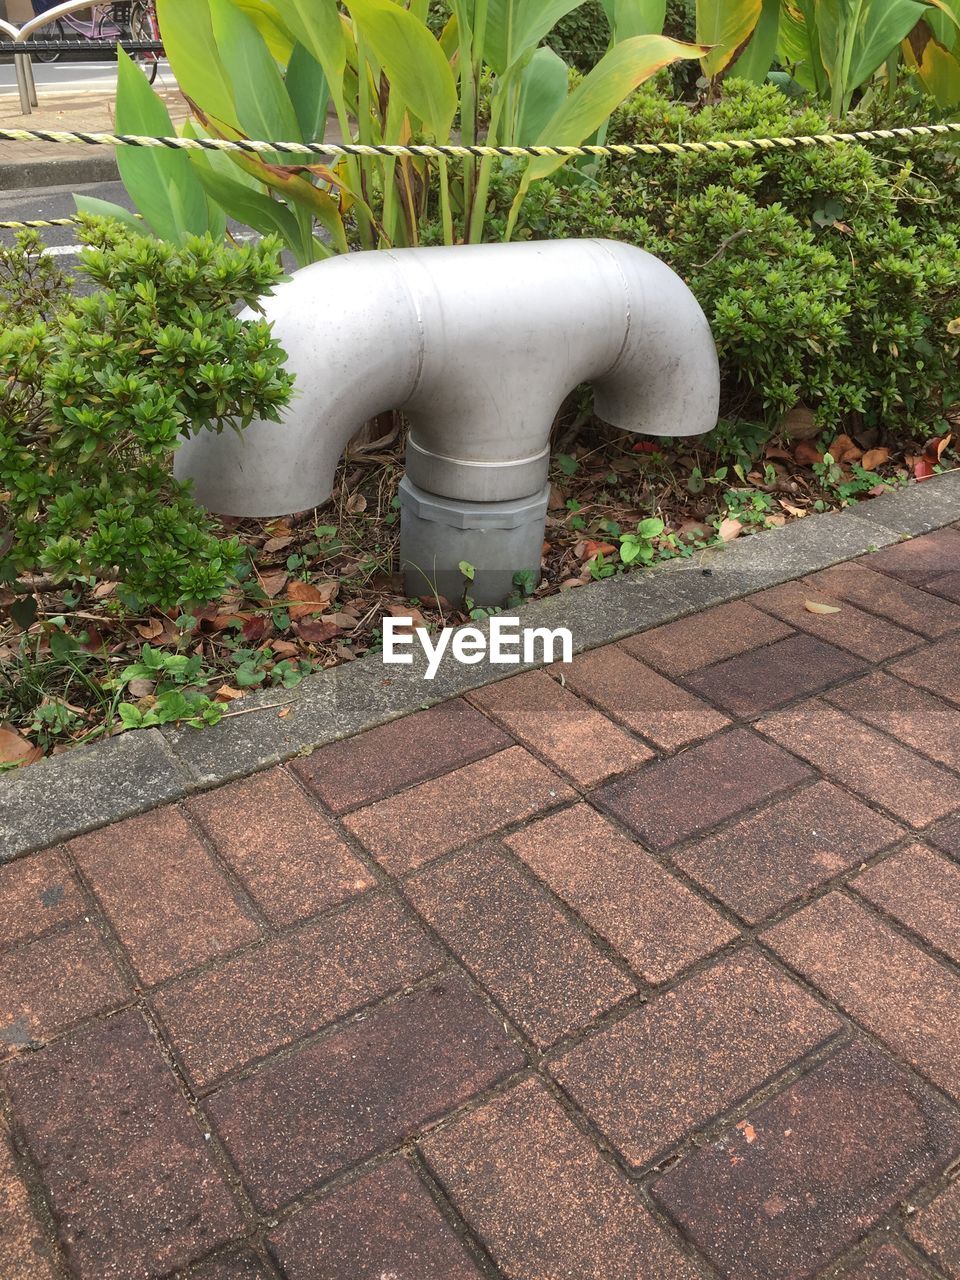 VIEW OF FIRE HYDRANT